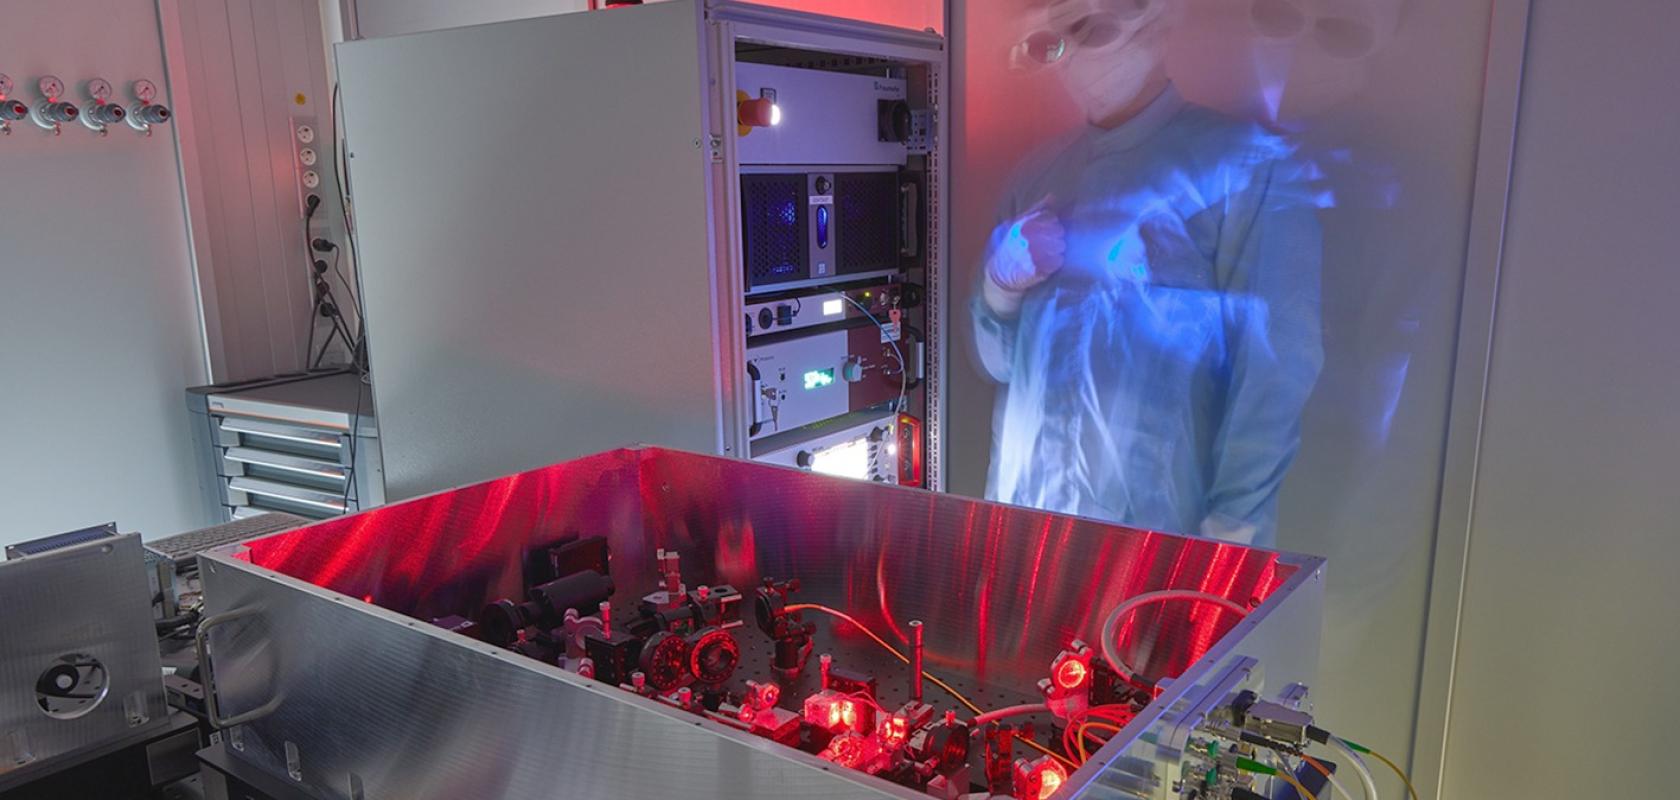 New components for networking quantum computers are being tested at Fraunhofer ILT.